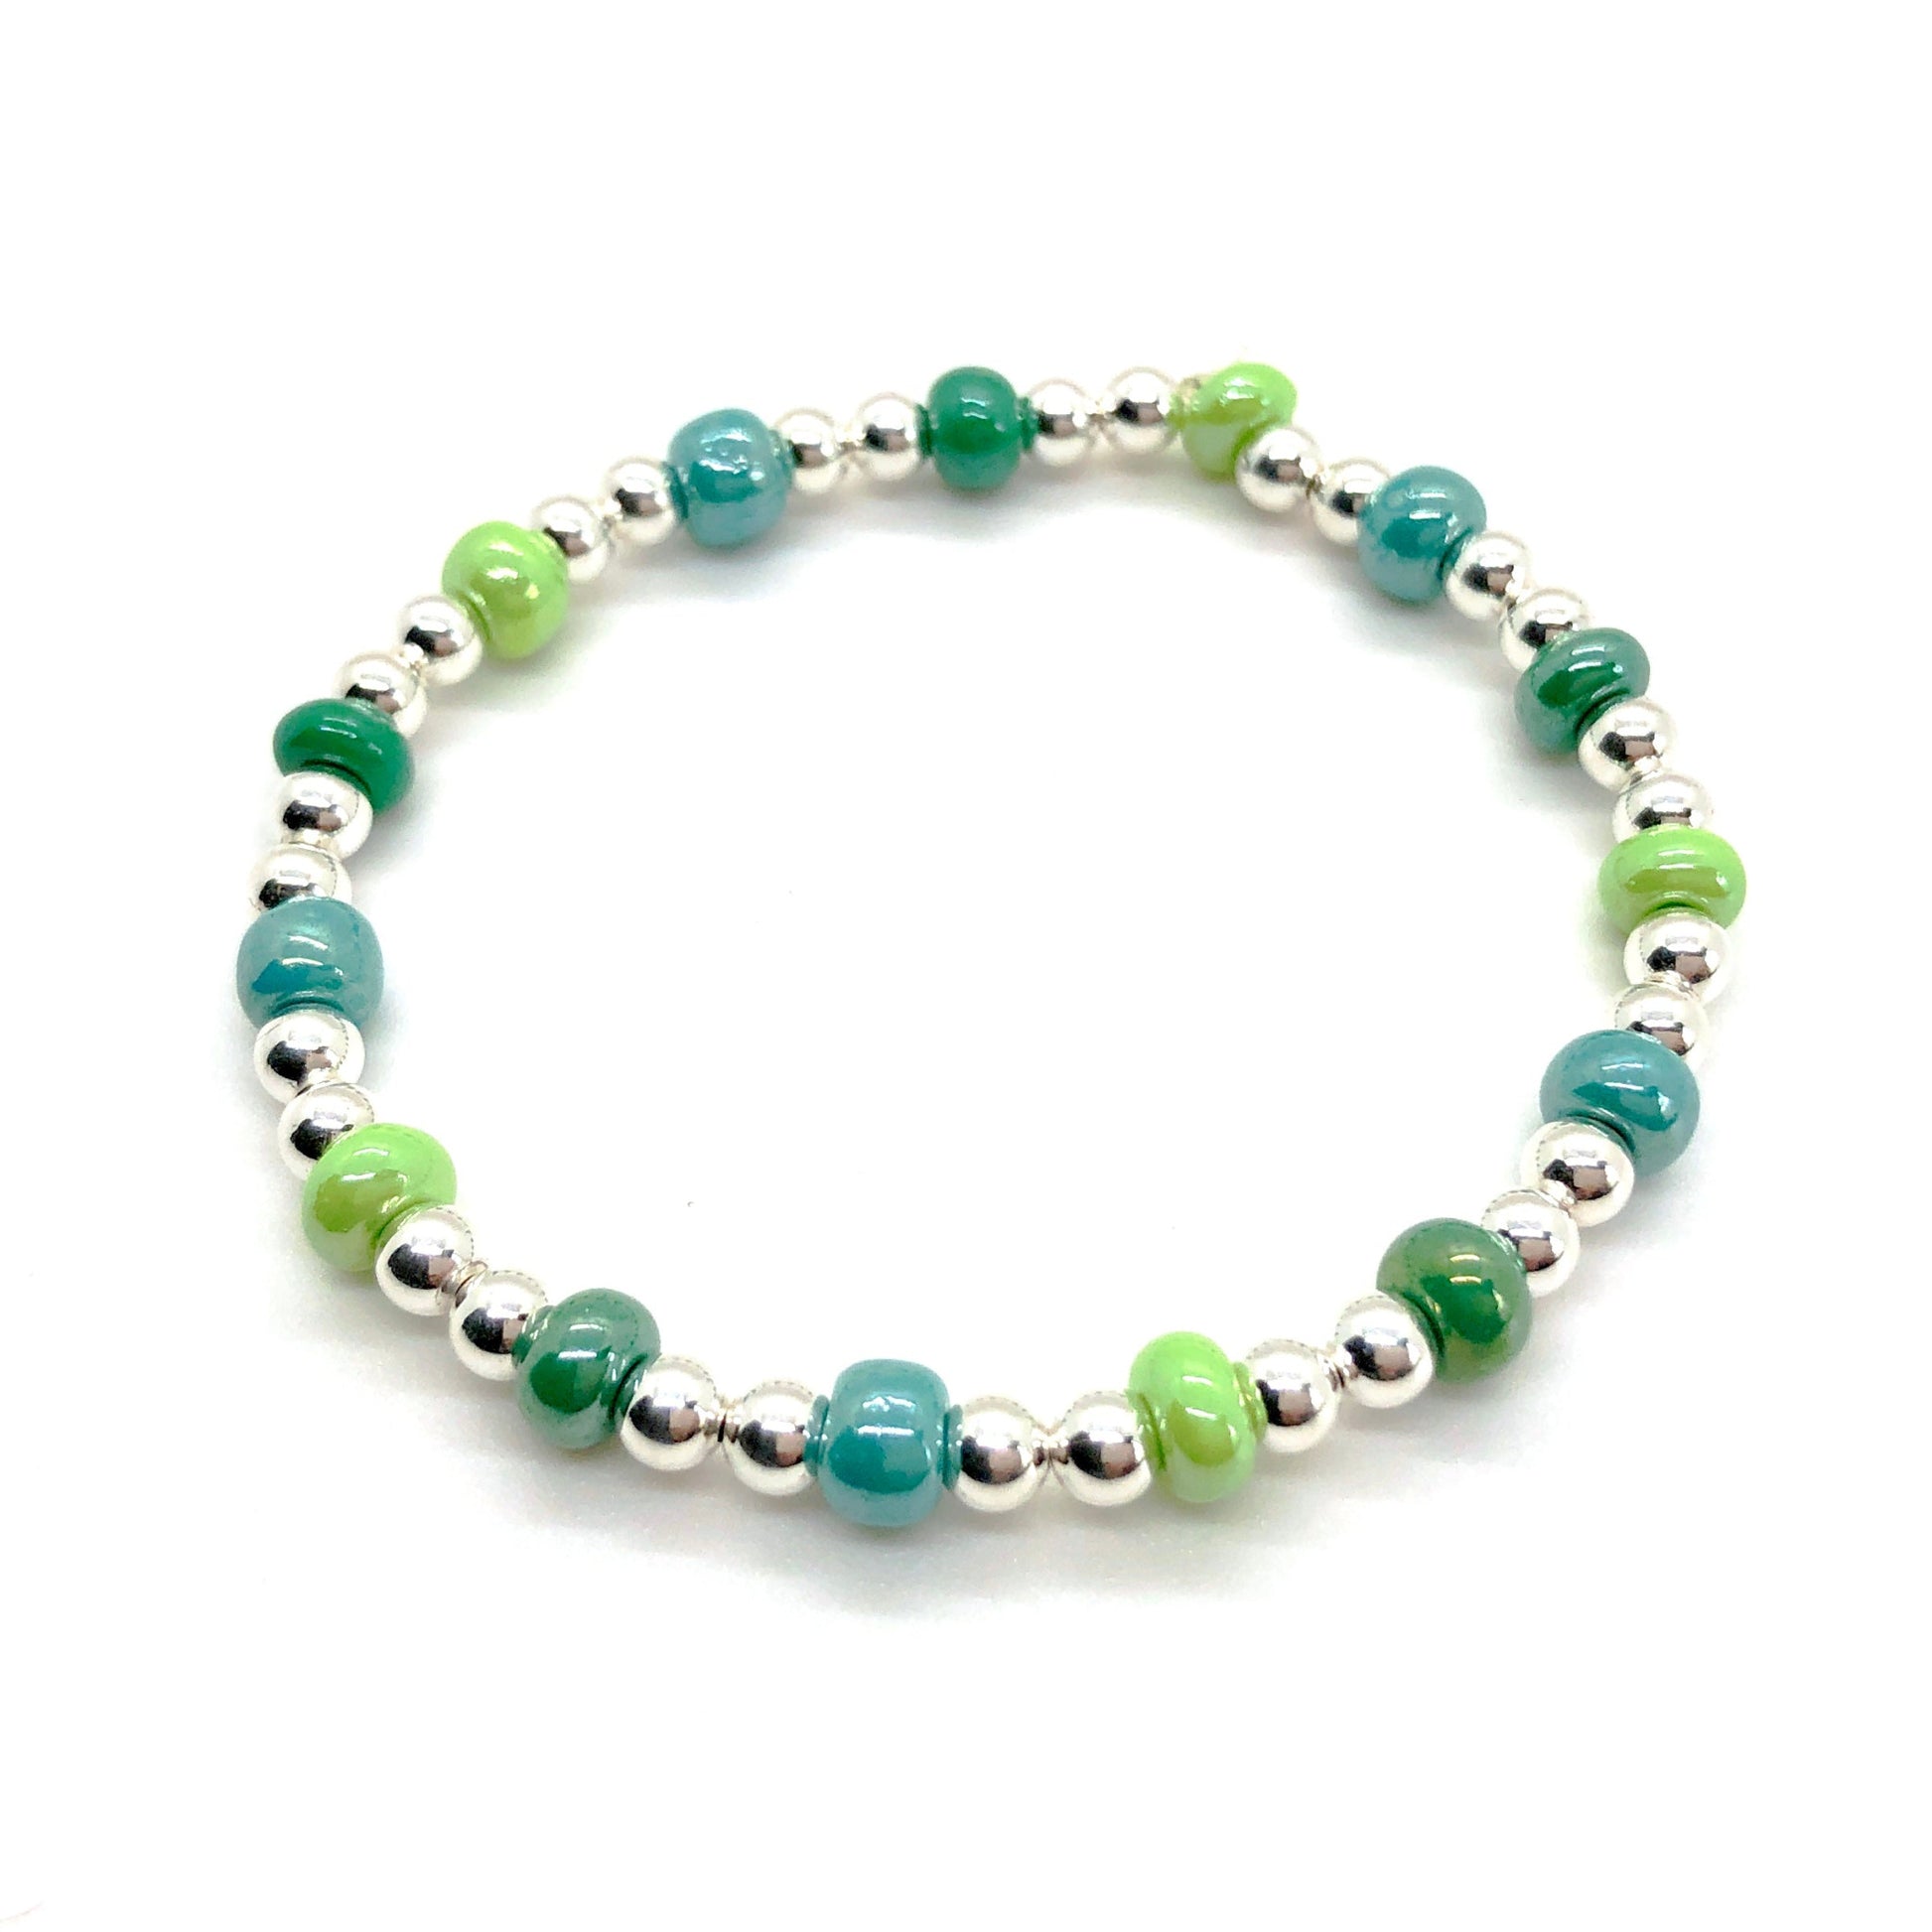 Silver stretch bracelet with 4mm sterling silver balls and alternating chunky glass beads in shades of green.